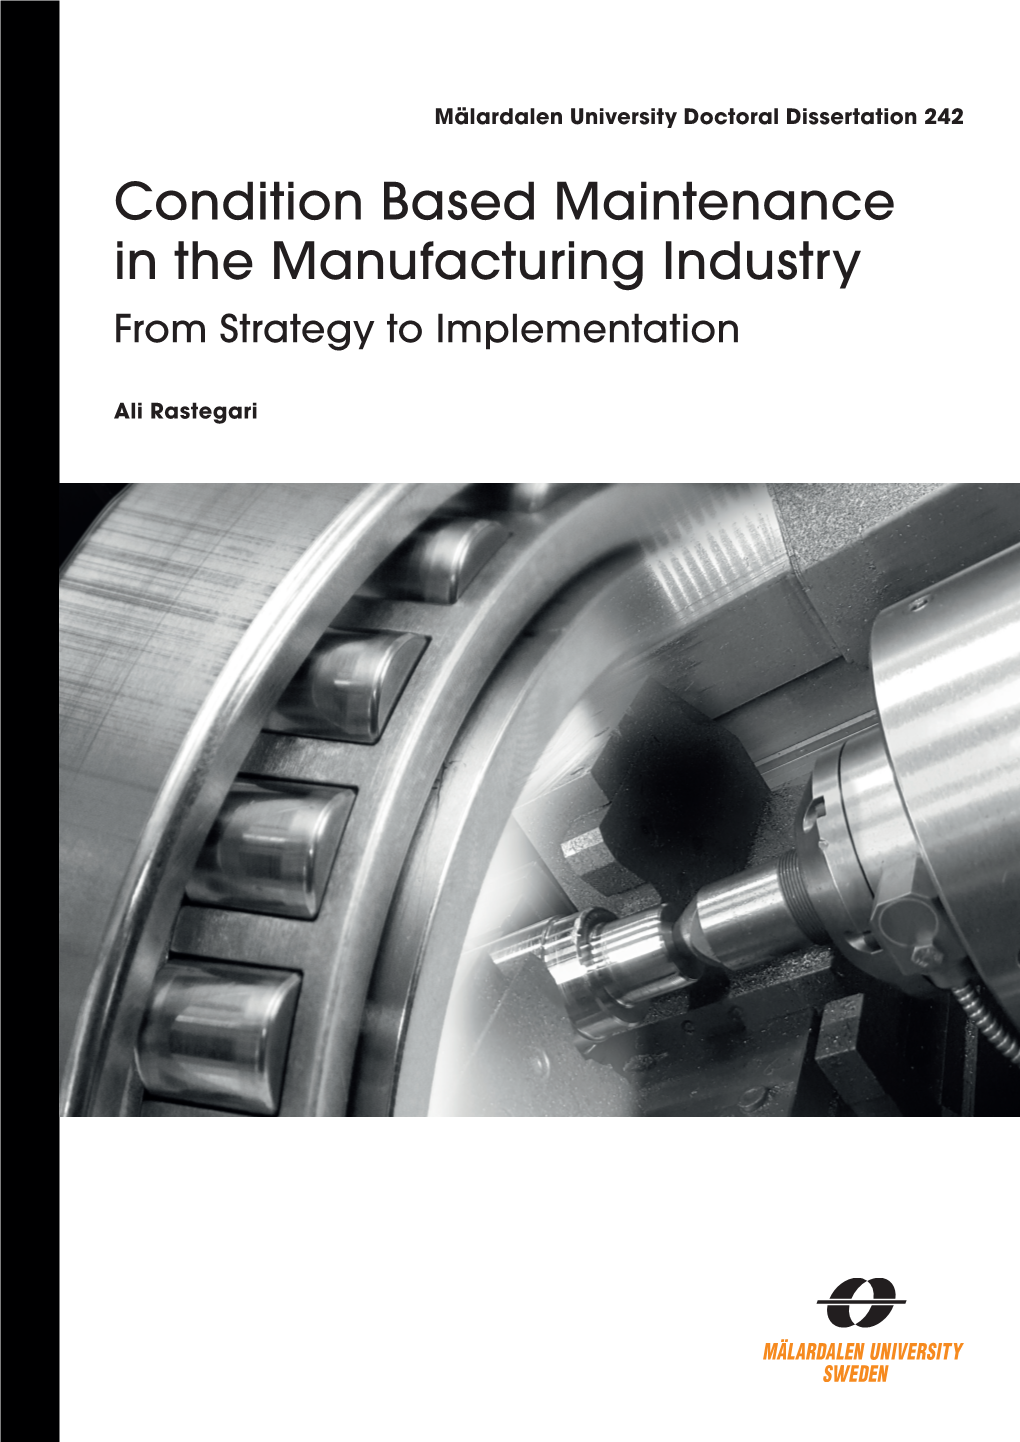 Condition Based Maintenance in the Manufacturing Industry from Strategy to Implementation